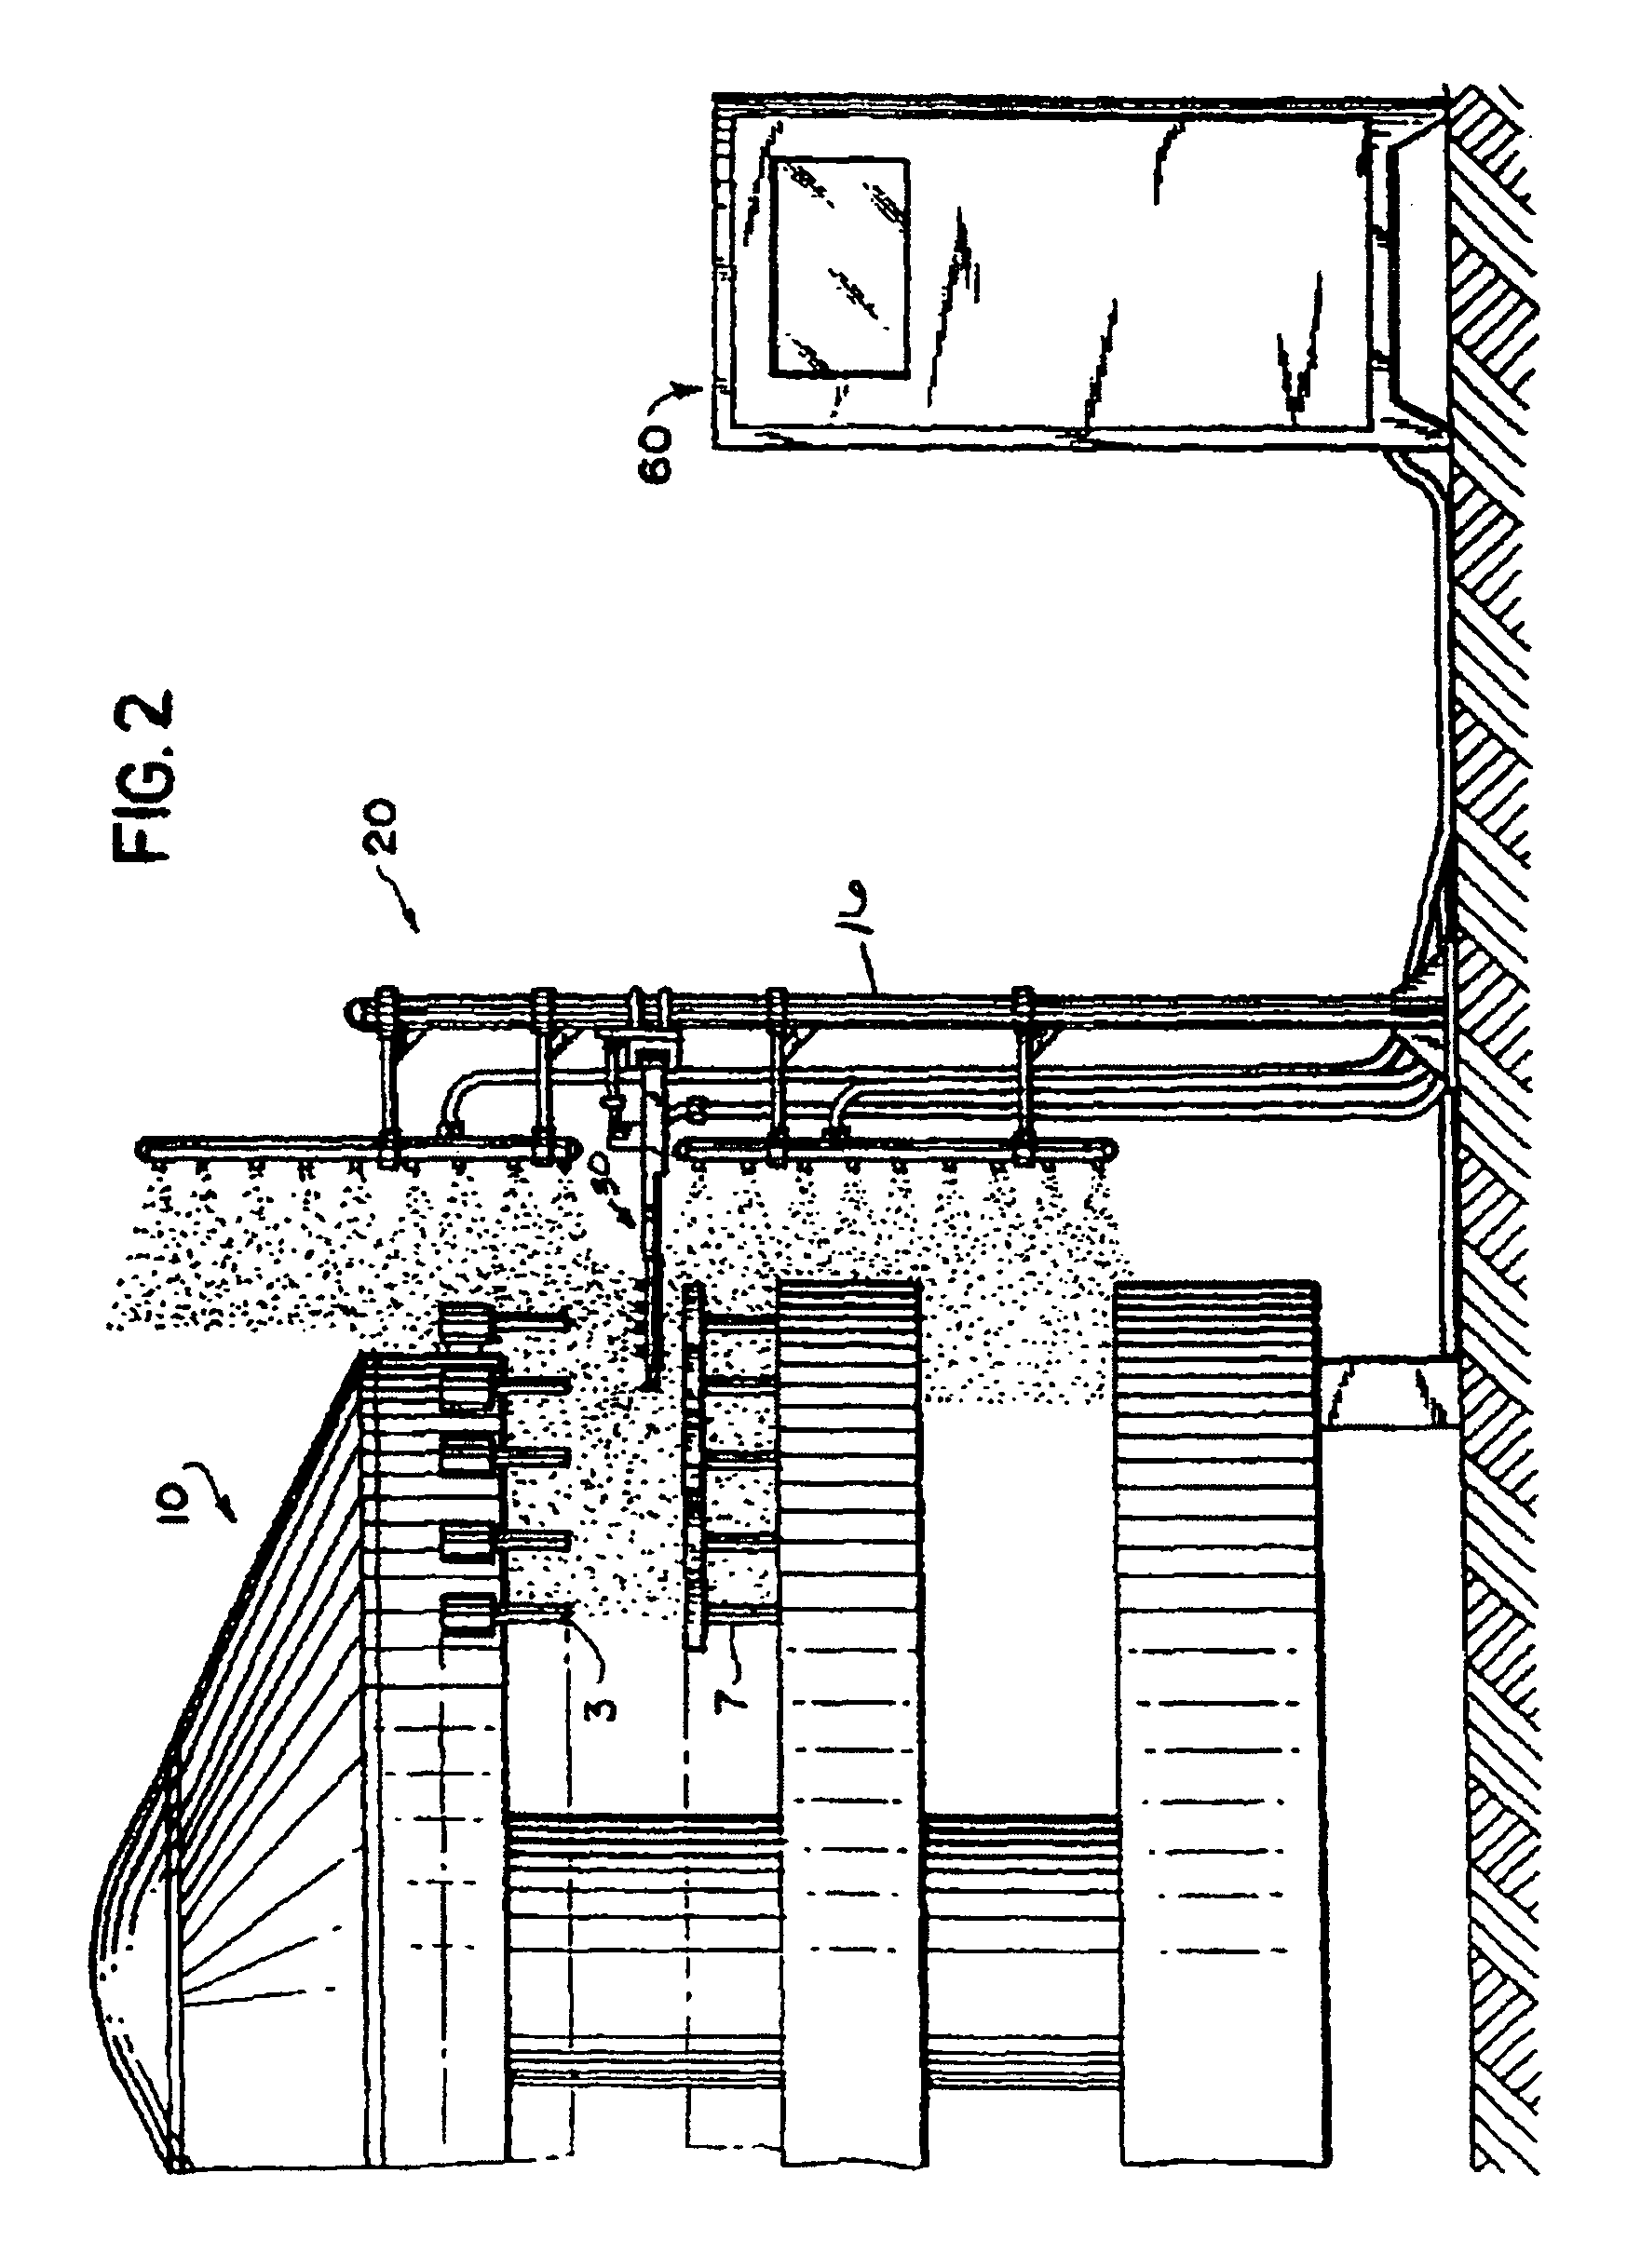 Cleaning system for a filling machine